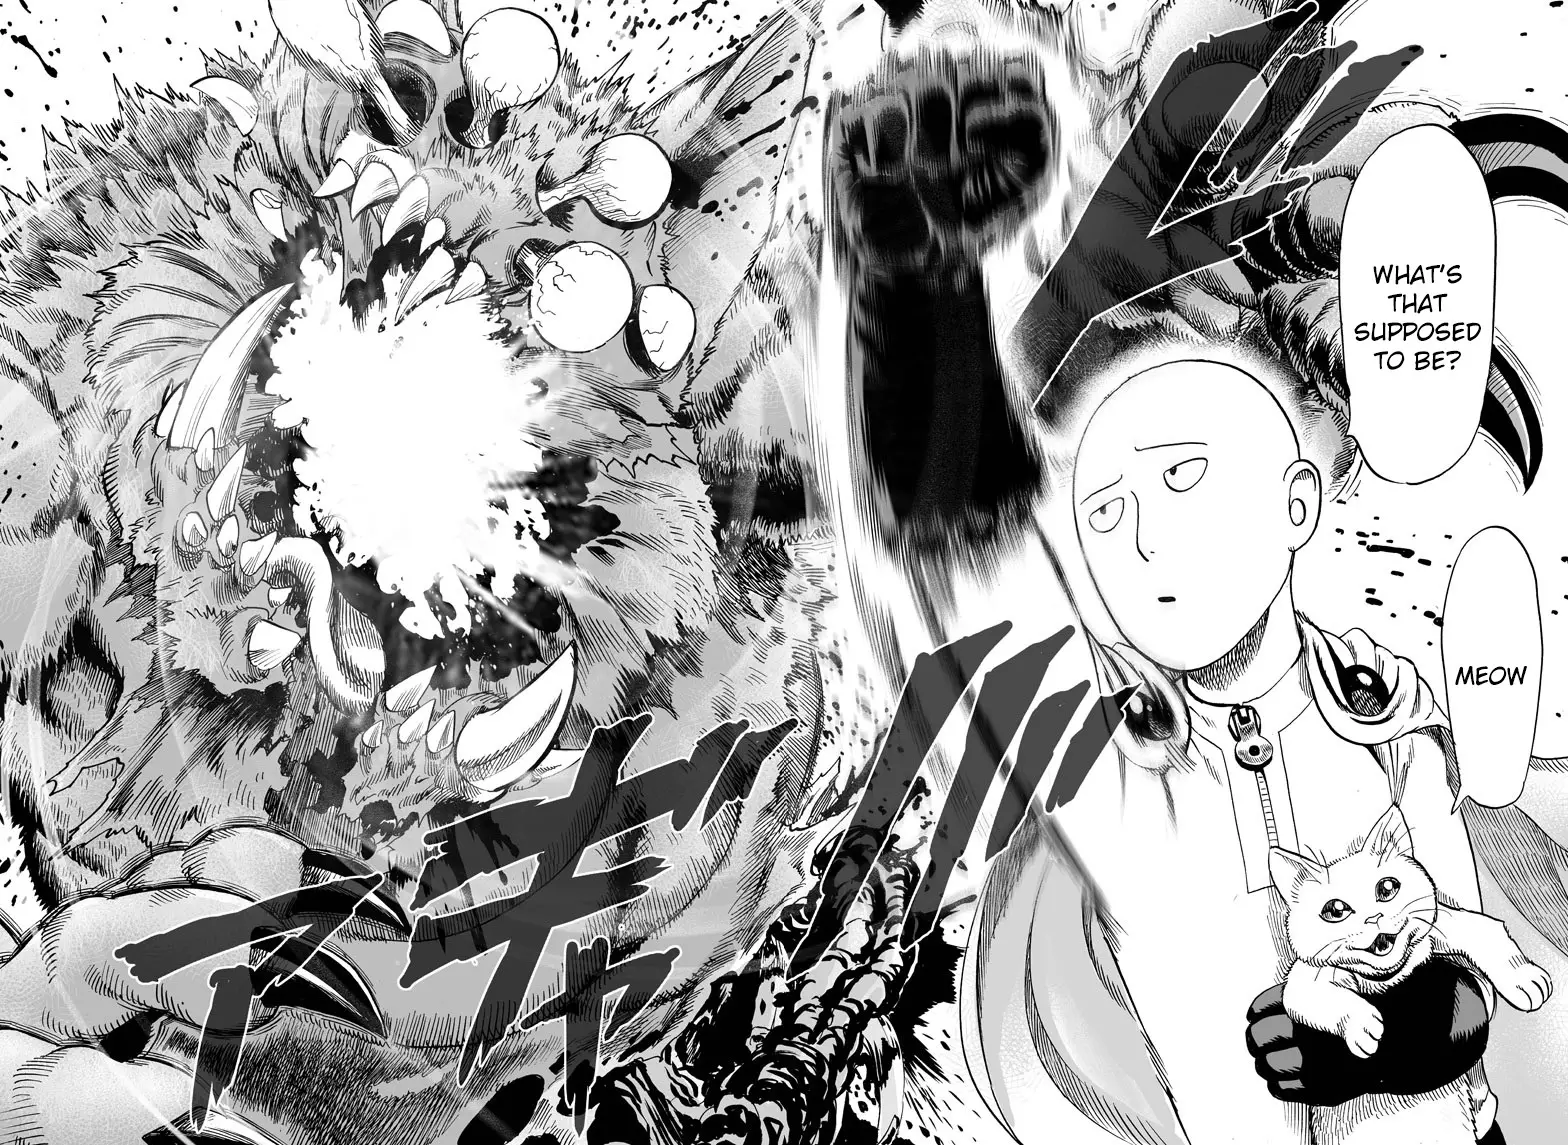 One Punch Man Chapter 40.1, READ One Punch Man Chapter 40.1 ONLINE, lost in the cloud genre,lost in the cloud gif,lost in the cloud girl,lost in the cloud goods,lost in the cloud goodreads,lost in the cloud,lost ark cloud gaming,lost odyssey cloud gaming,lost in the cloud fanart,lost in the cloud fanfic,lost in the cloud fandom,lost in the cloud first kiss,lost in the cloud font,lost in the cloud ending,lost in the cloud episode 97,lost in the cloud edit,lost in the cloud explained,lost in the cloud dog,lost in the cloud discord server,lost in the cloud desktop wallpaper,lost in the cloud drawing,can't find my cloud on network,lost in the cloud characters,lost in the cloud chapter 93 release date,lost in the cloud birthday,lost in the cloud birthday art,lost in the cloud background,lost in the cloud banner,lost in the clouds meaning,what is the black cloud in lost,lost in the cloud ao3,lost in the cloud anime,lost in the cloud art,lost in the cloud author twitter,lost in the cloud author instagram,lost in the cloud artist,lost in the cloud acrylic stand,lost in the cloud artist twitter,lost in the cloud art style,lost in the cloud analysis